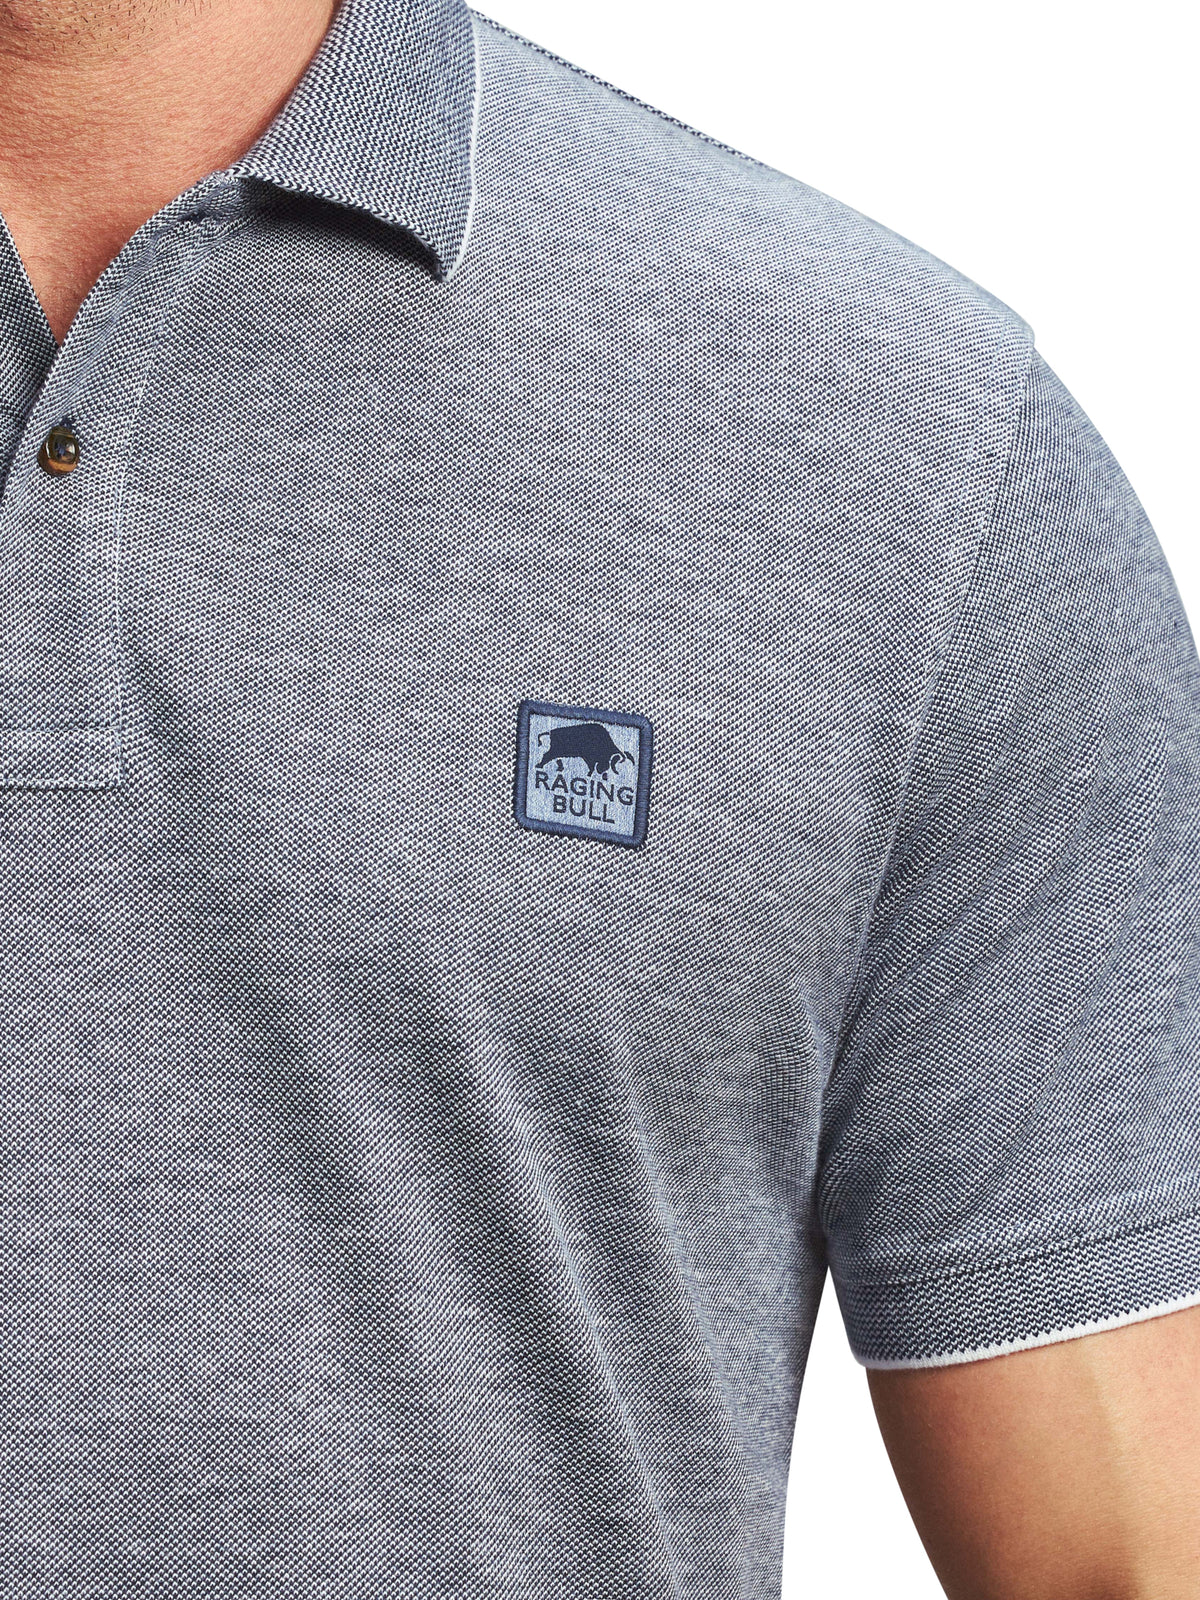 Embroidered Patch Birdseye Polo - Navy